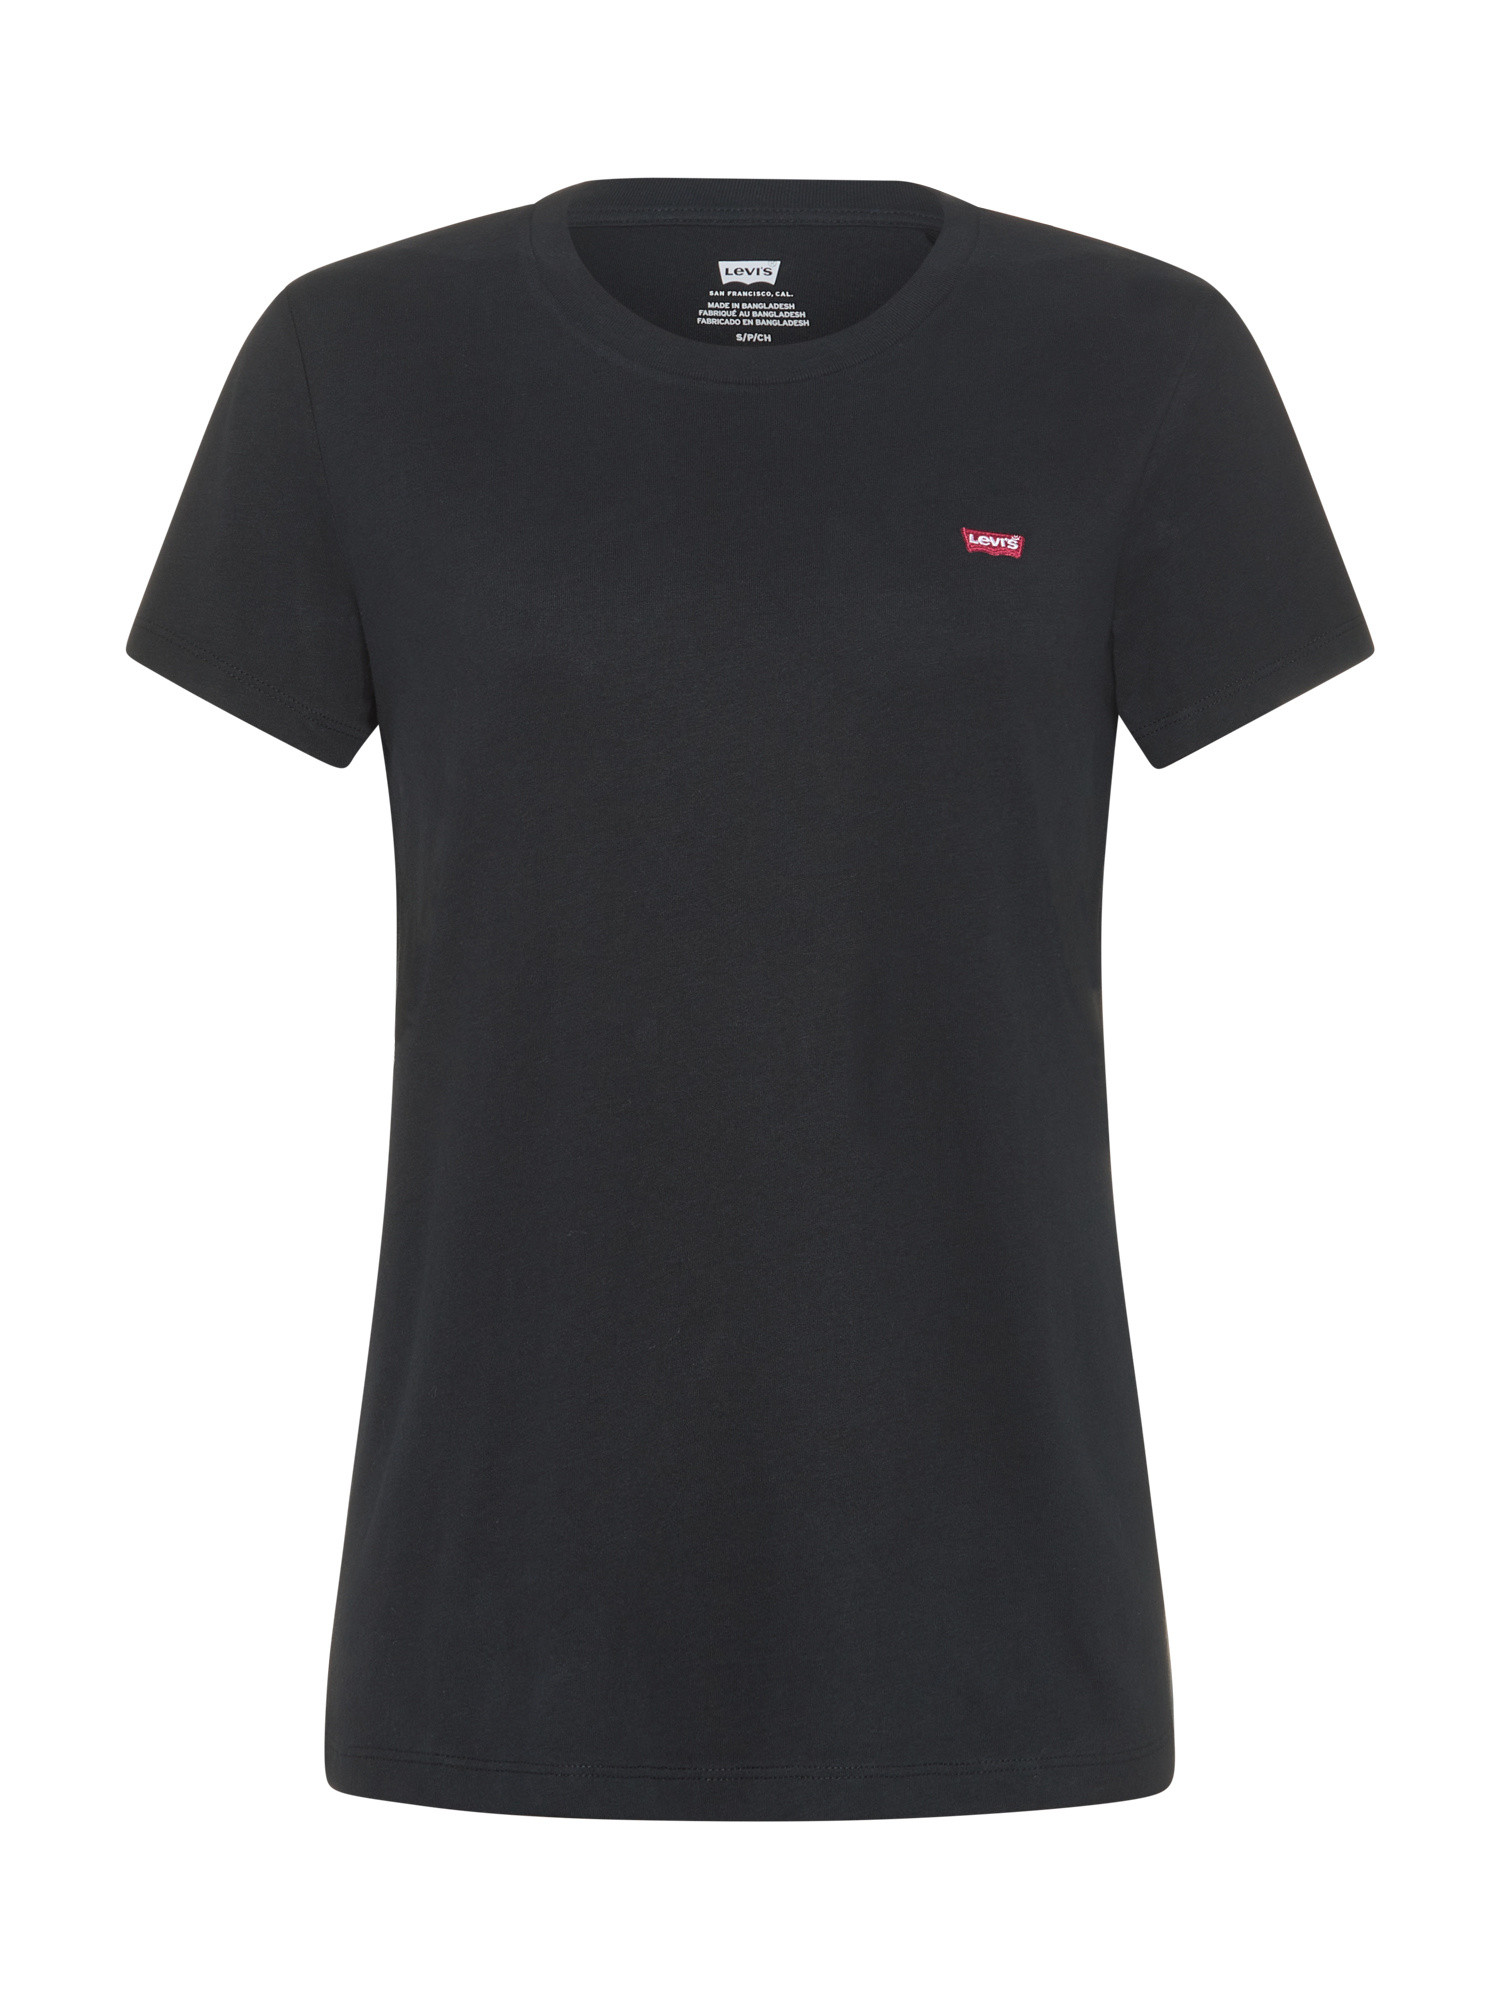 Levi's - T-shirt in cotone con logo, Nero, large image number 0